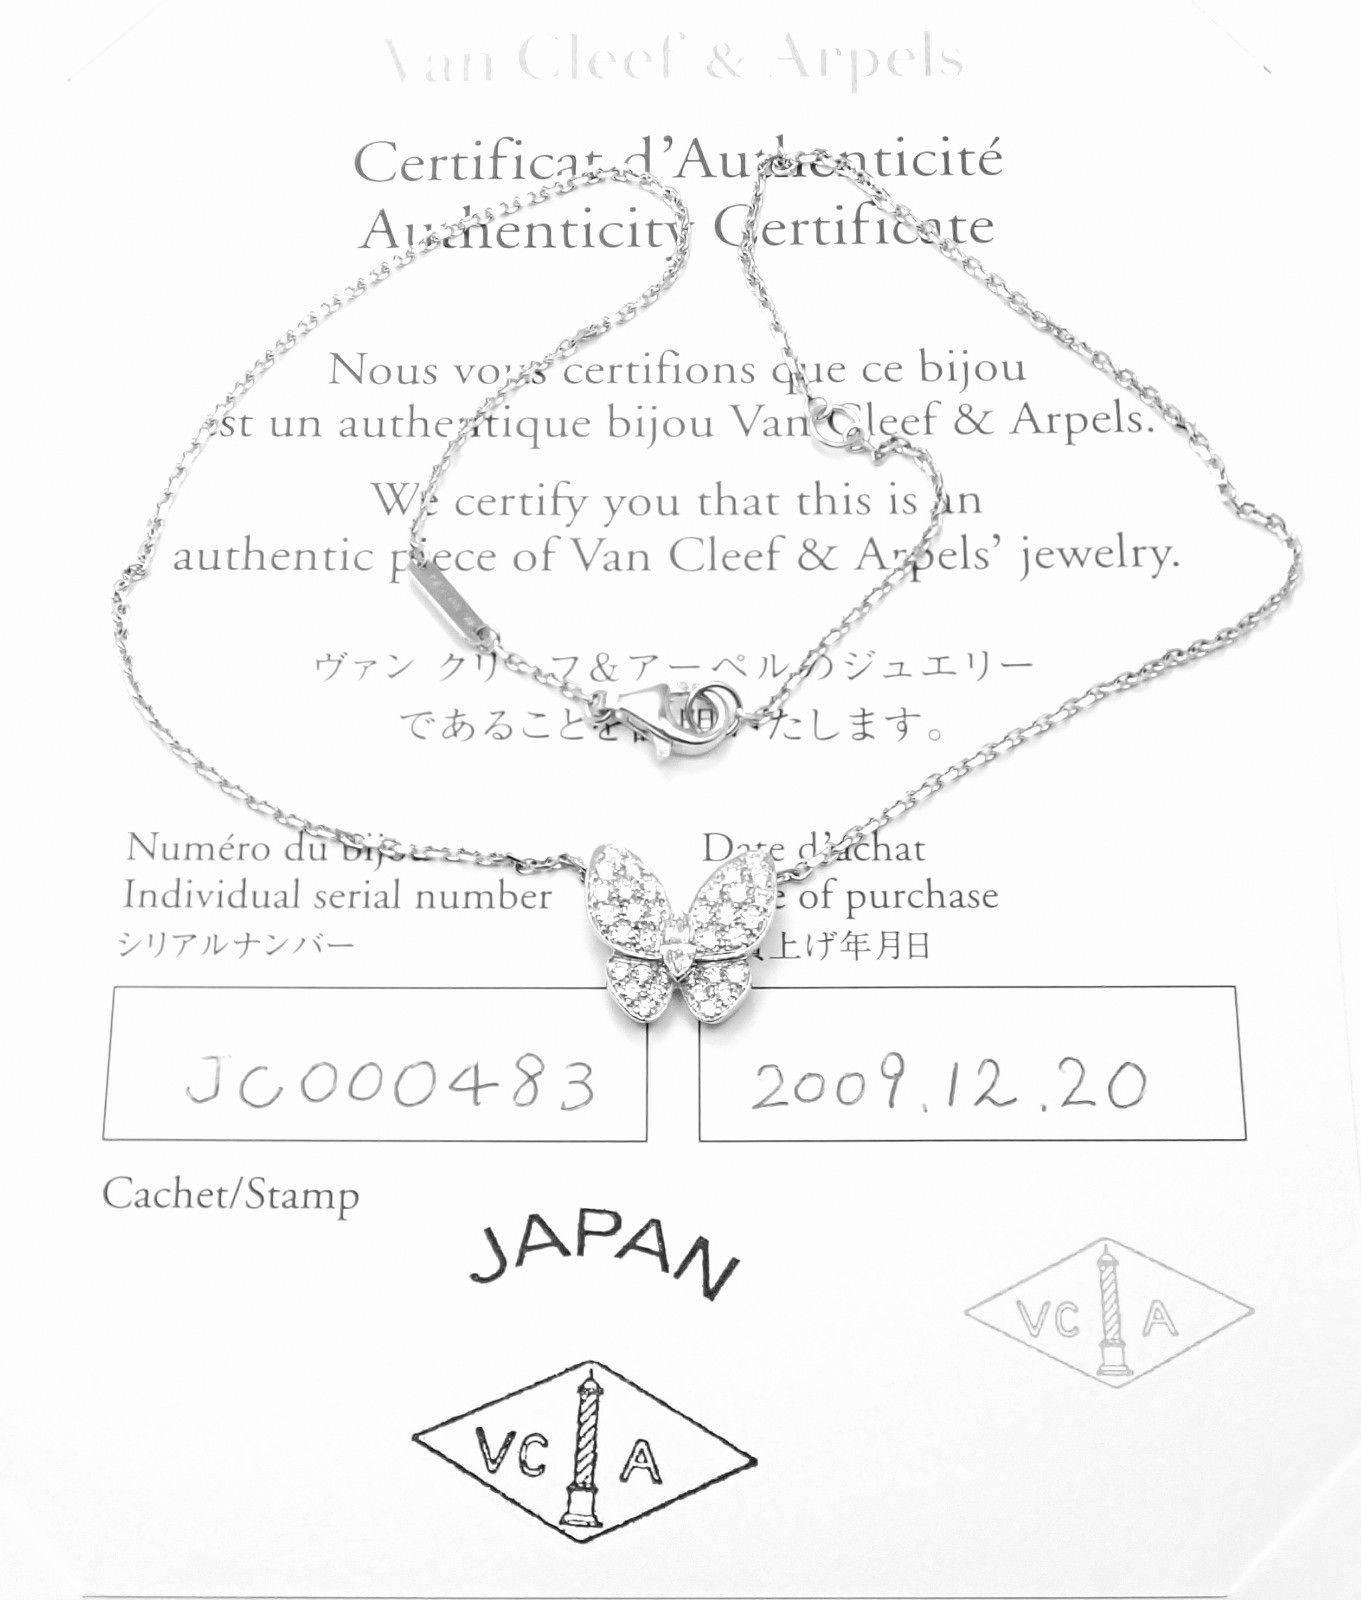 18k White Gold Diamond Butterfly Papillon Pendant Necklace by Van Cleef & Arpels. 
With 35 diamond VVS1 clarity, E color total weight .85ct 
This necklace comes with Van Cleef & Arpels certificate.
Details: 
Length: 16.5